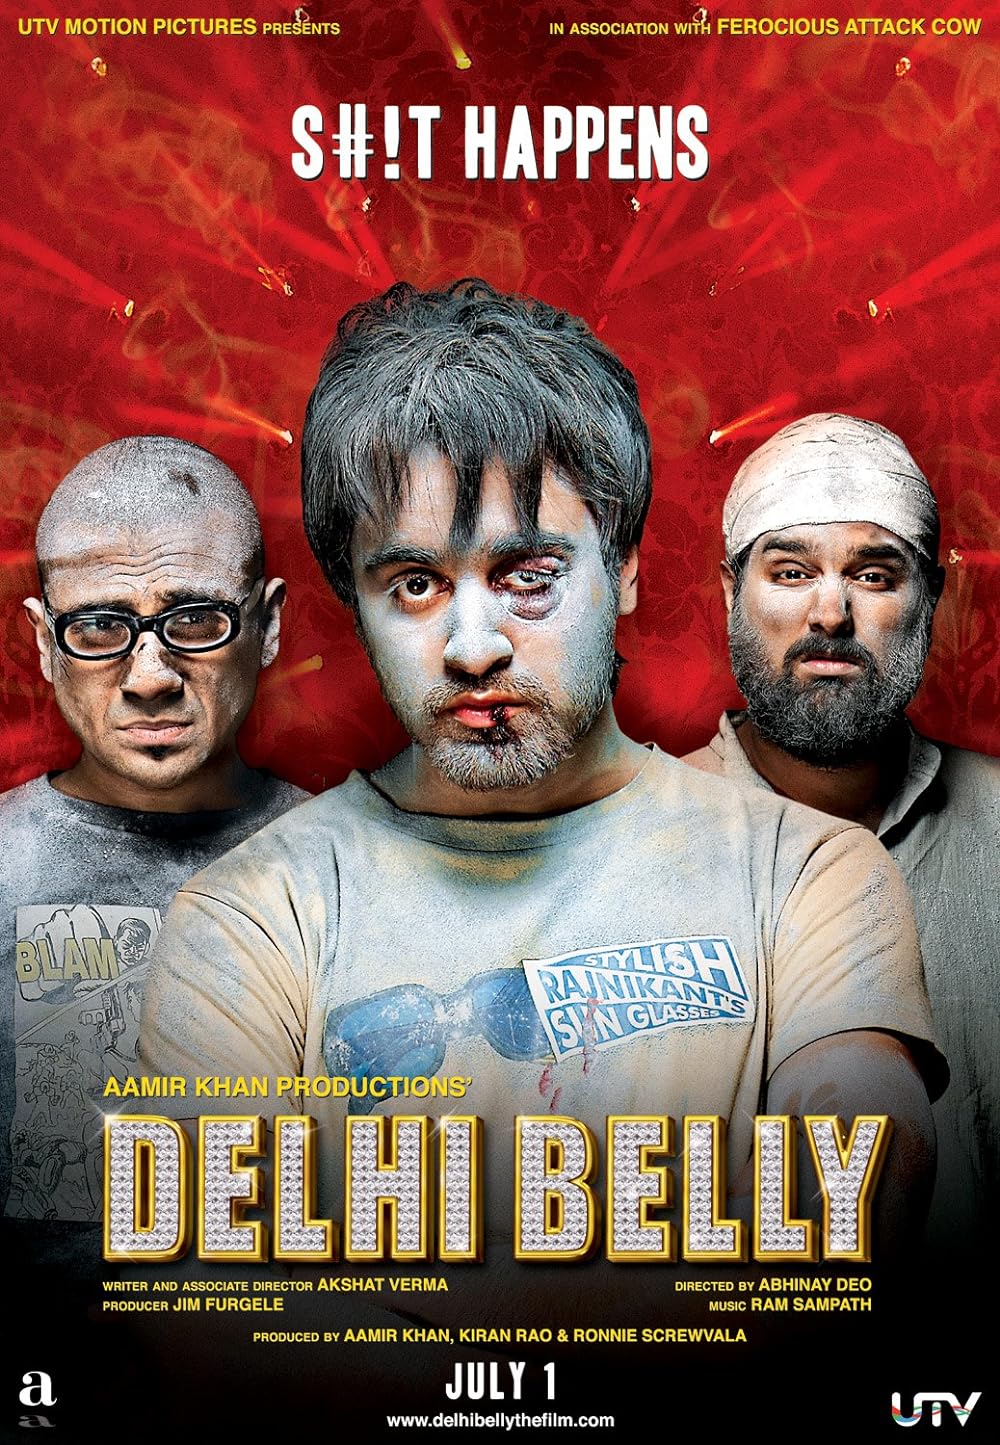 corey ratzlaff recommends Belly Movie Free Download